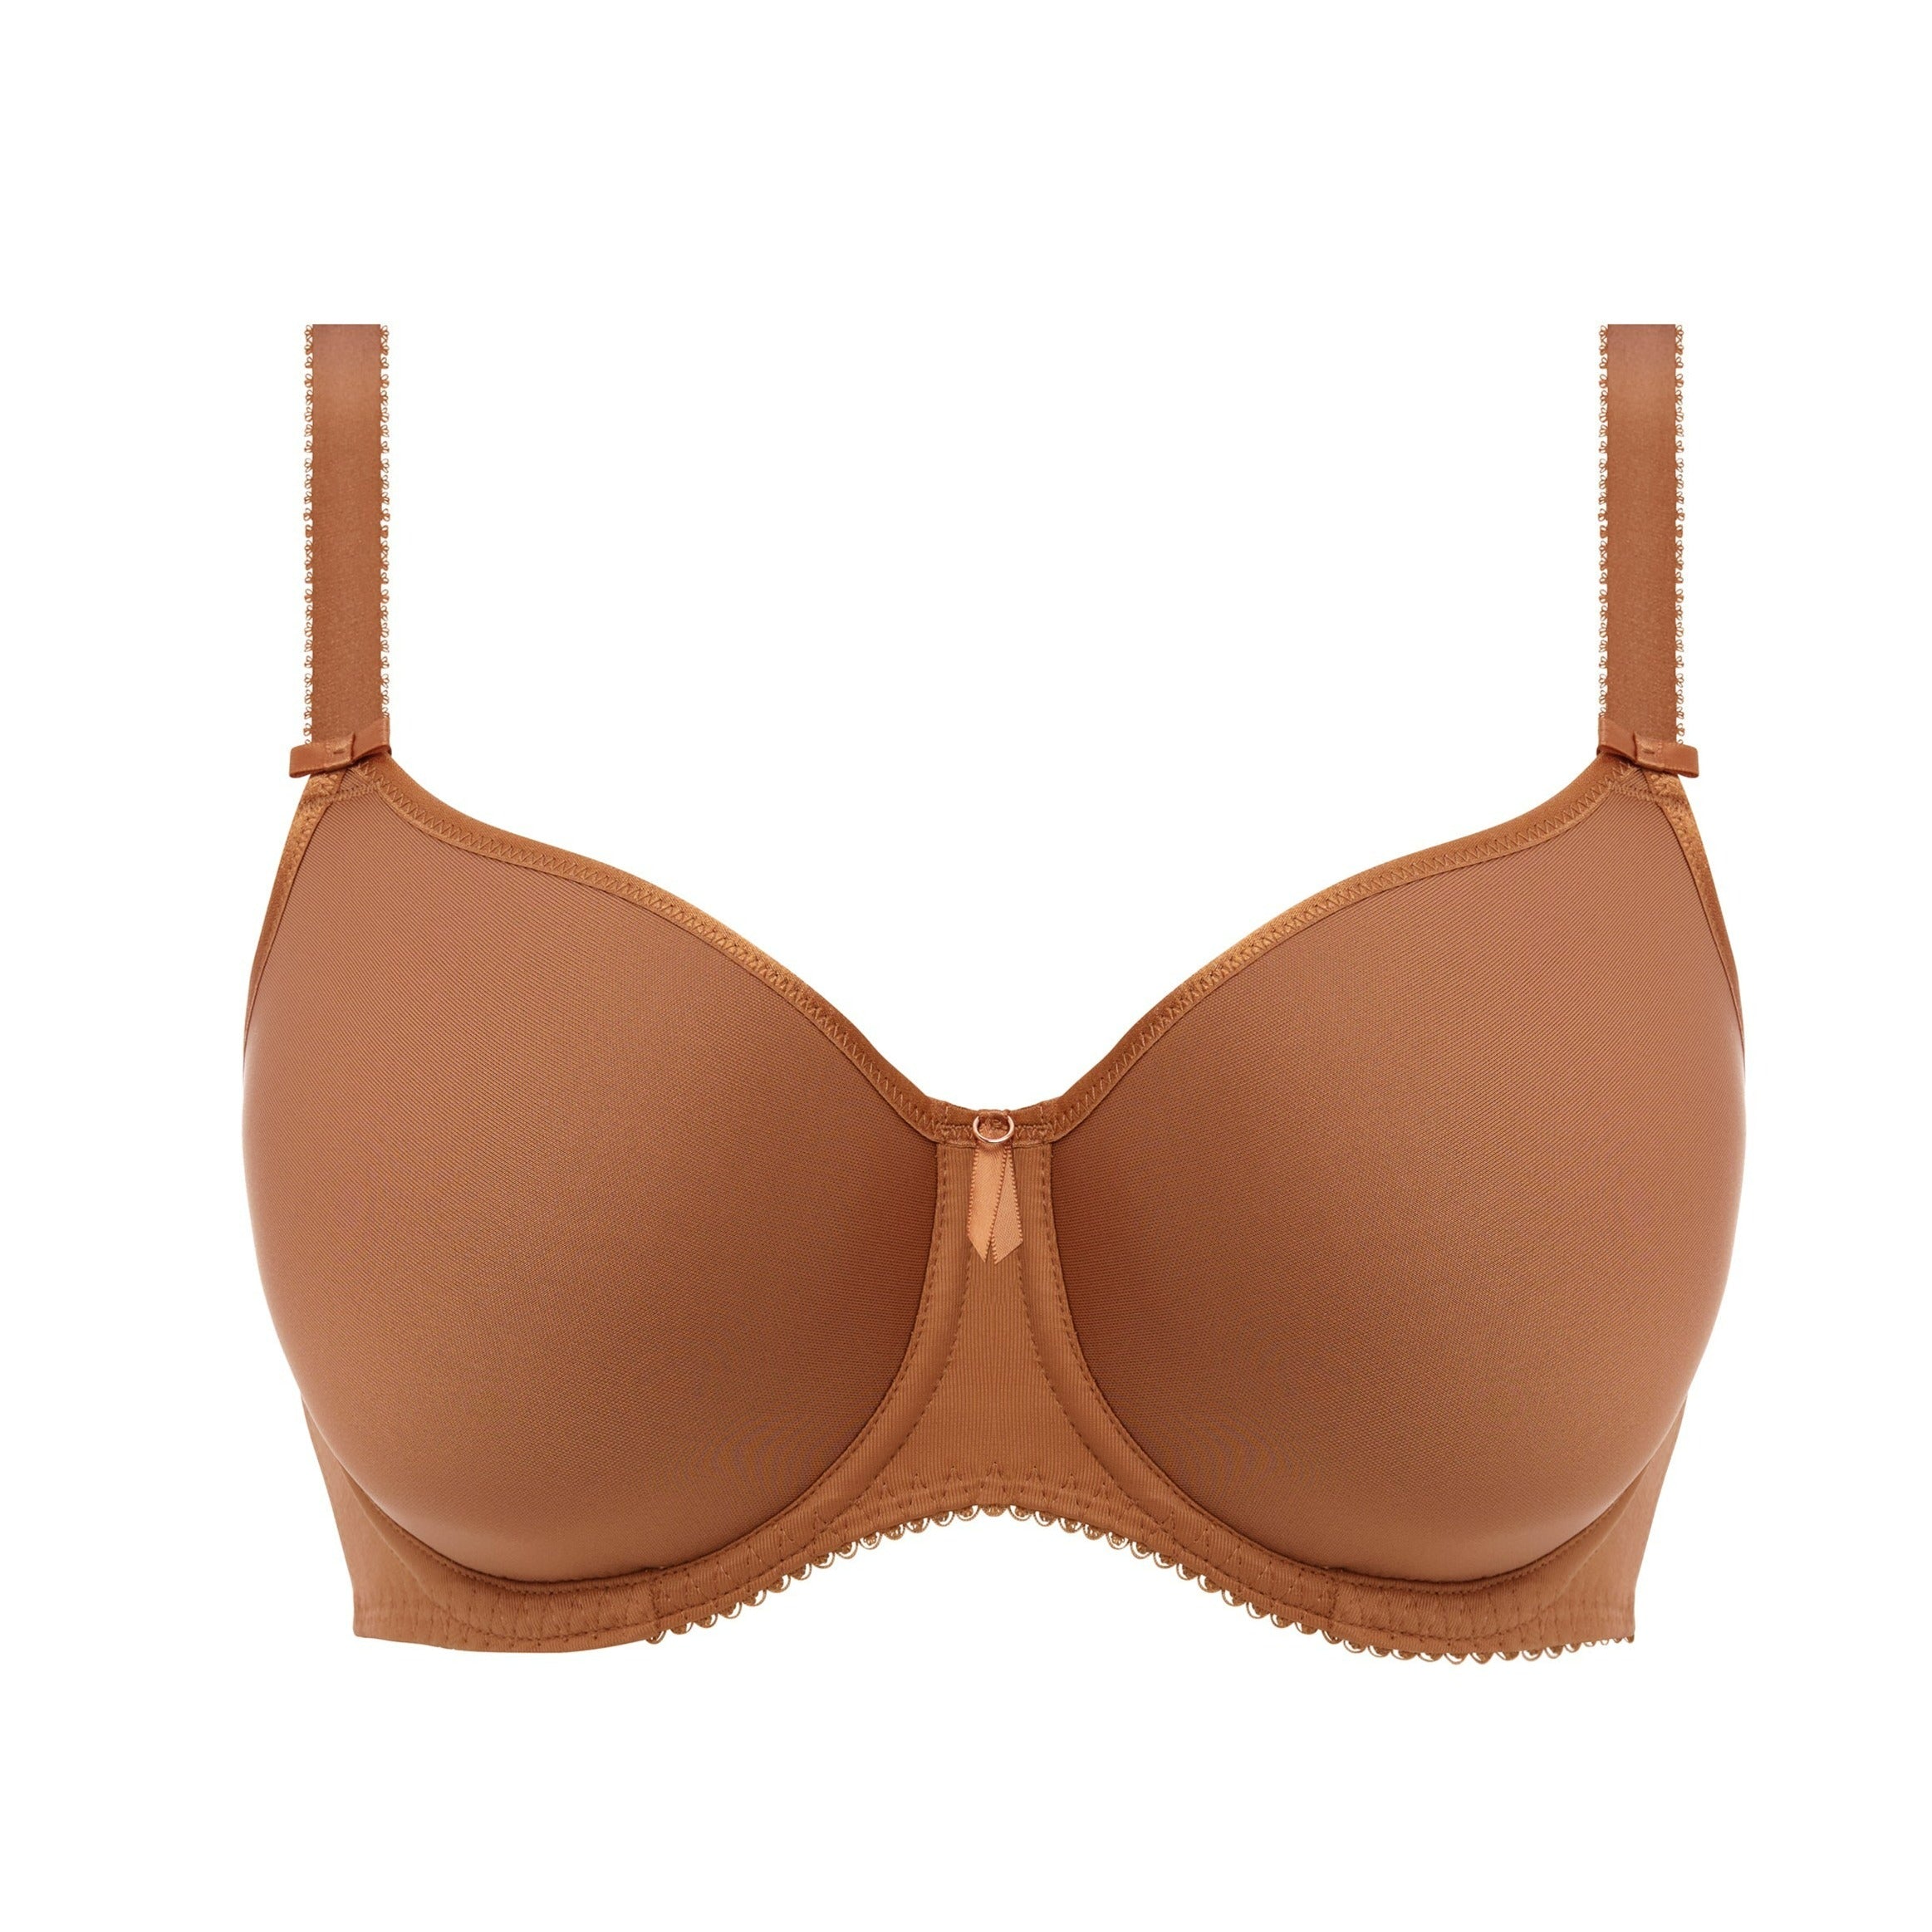 Undress to Impress! Bra that gives F's— fabric, form, function